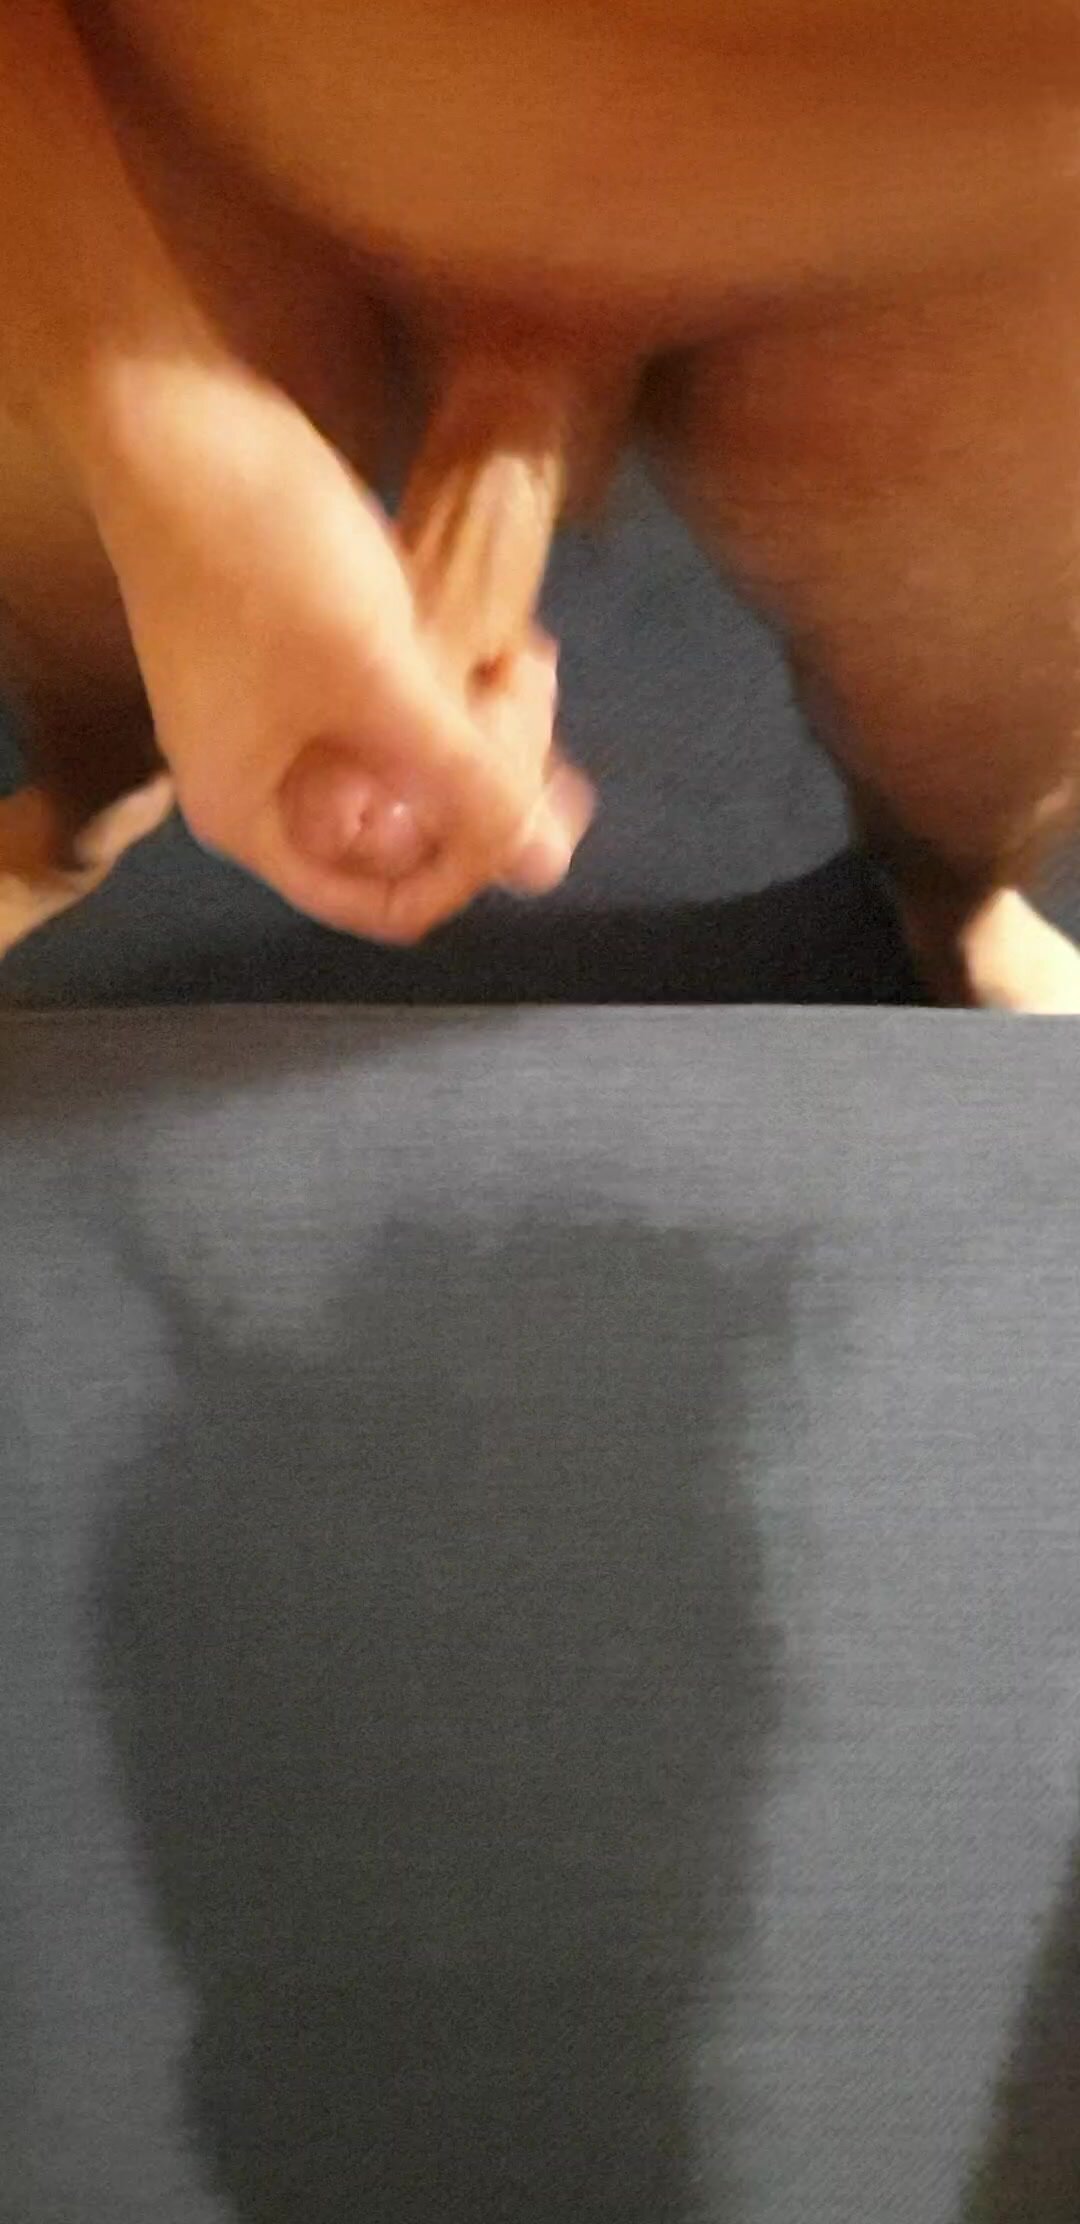 Cuming on couch